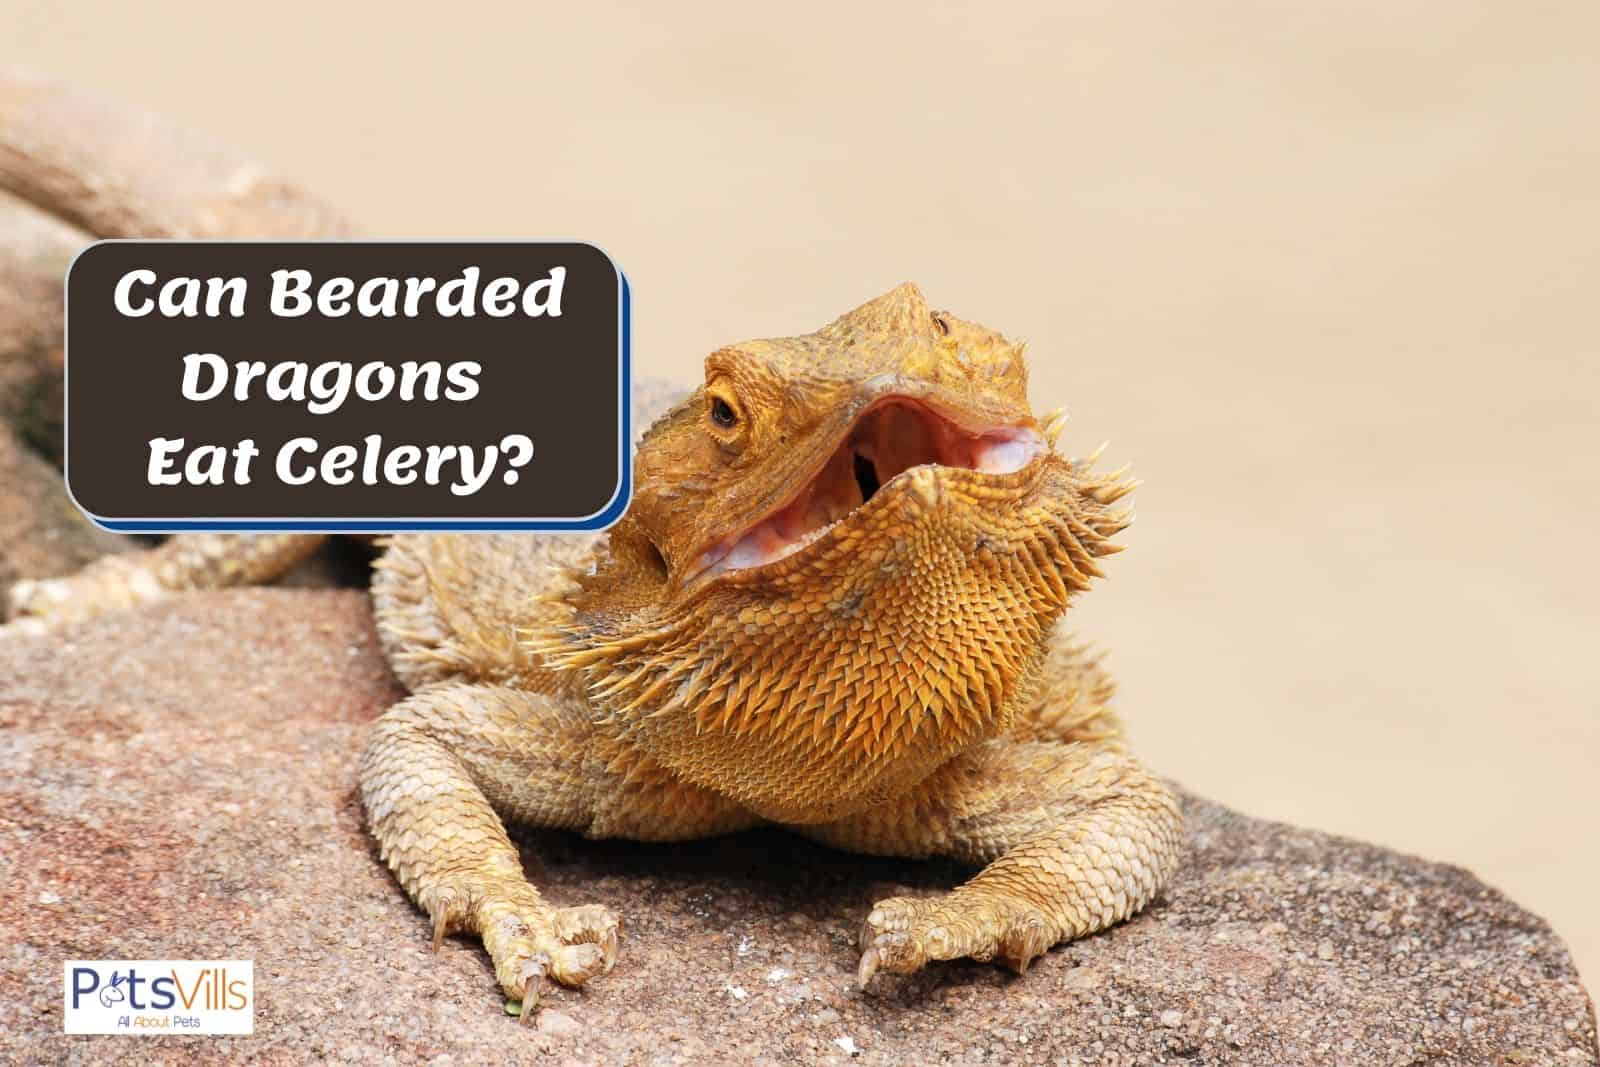 a bearded dragon with a large open mouth